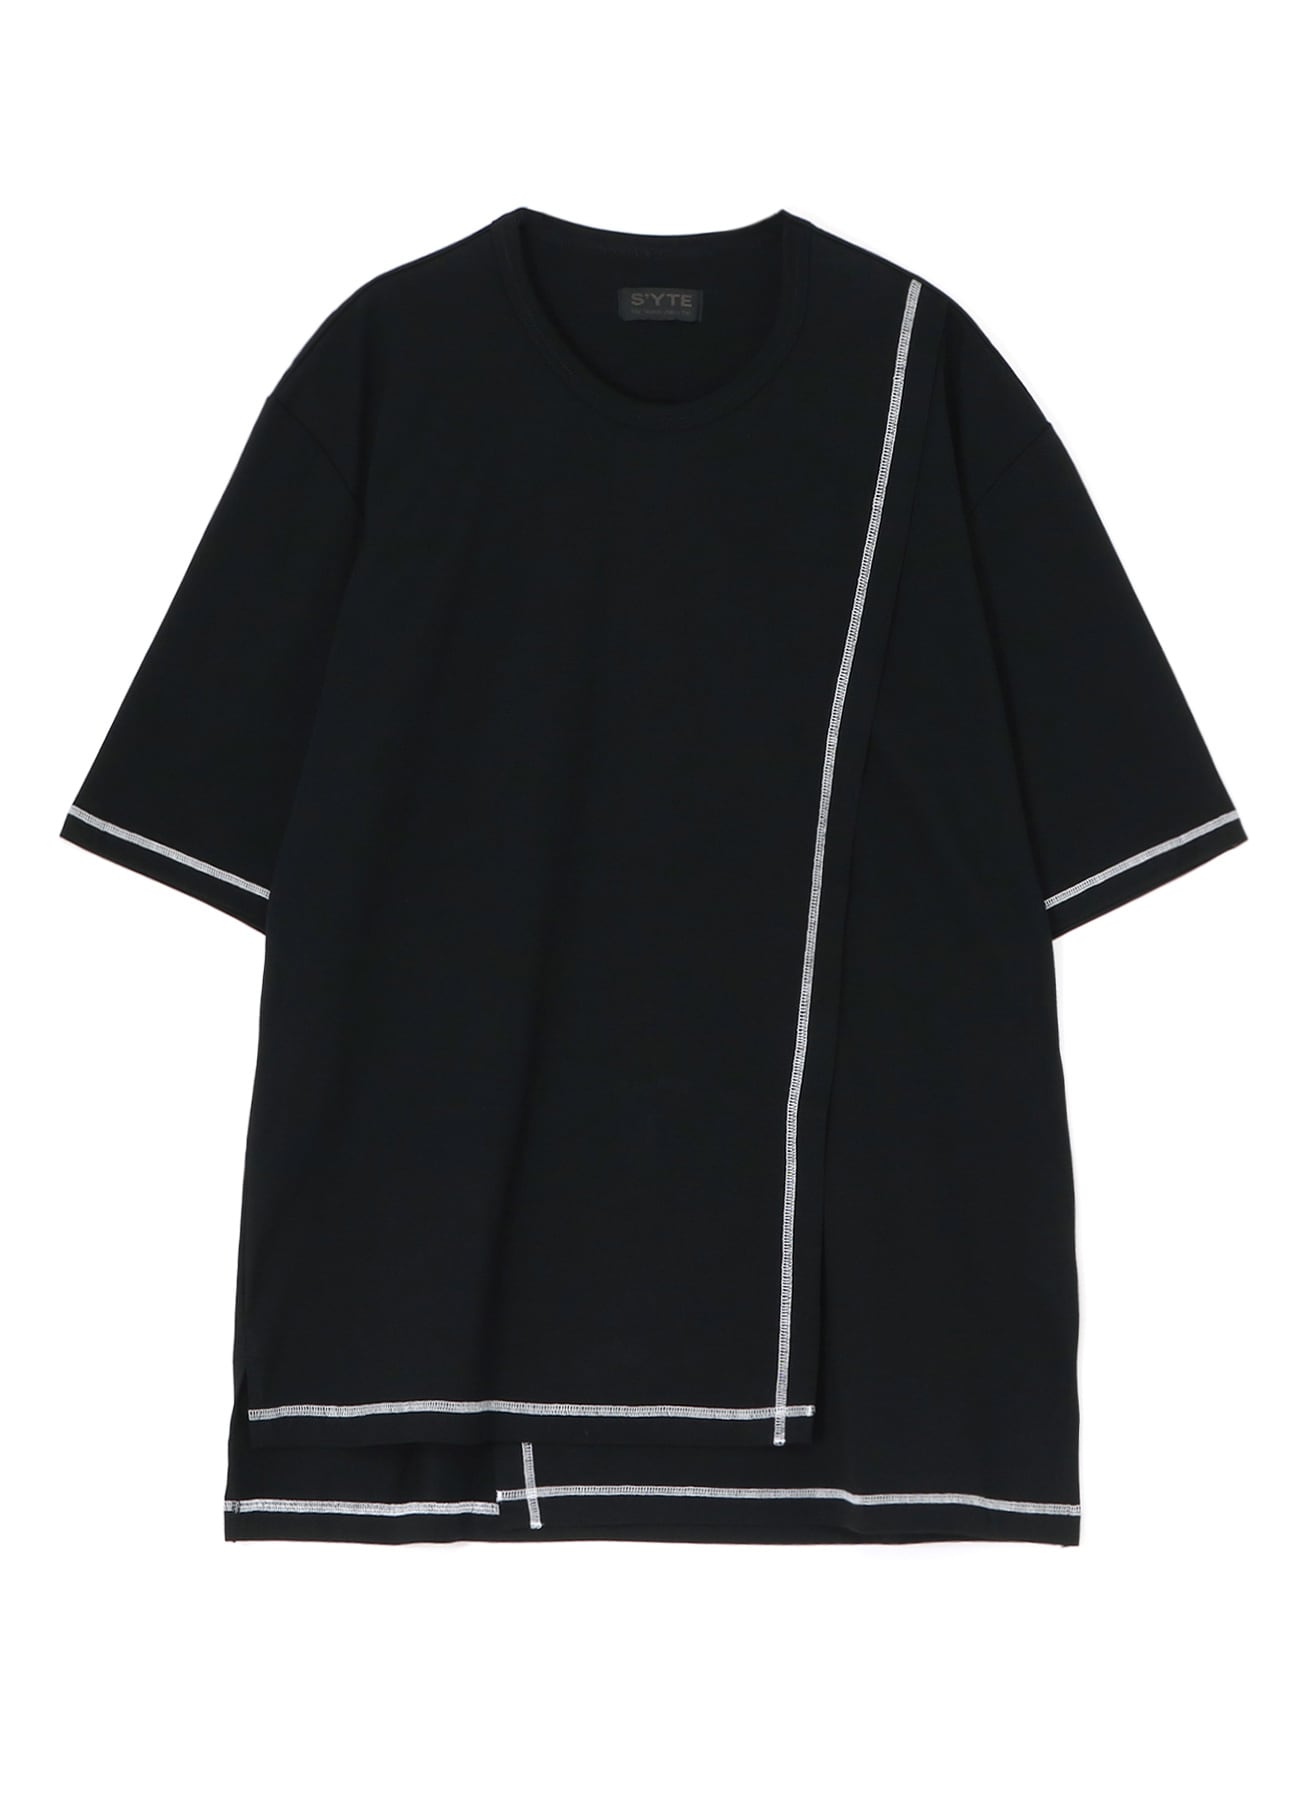 COTTON JERSEY CREW NECK HALF-LAYERED T-SHIRT WITH COLOR STITCH